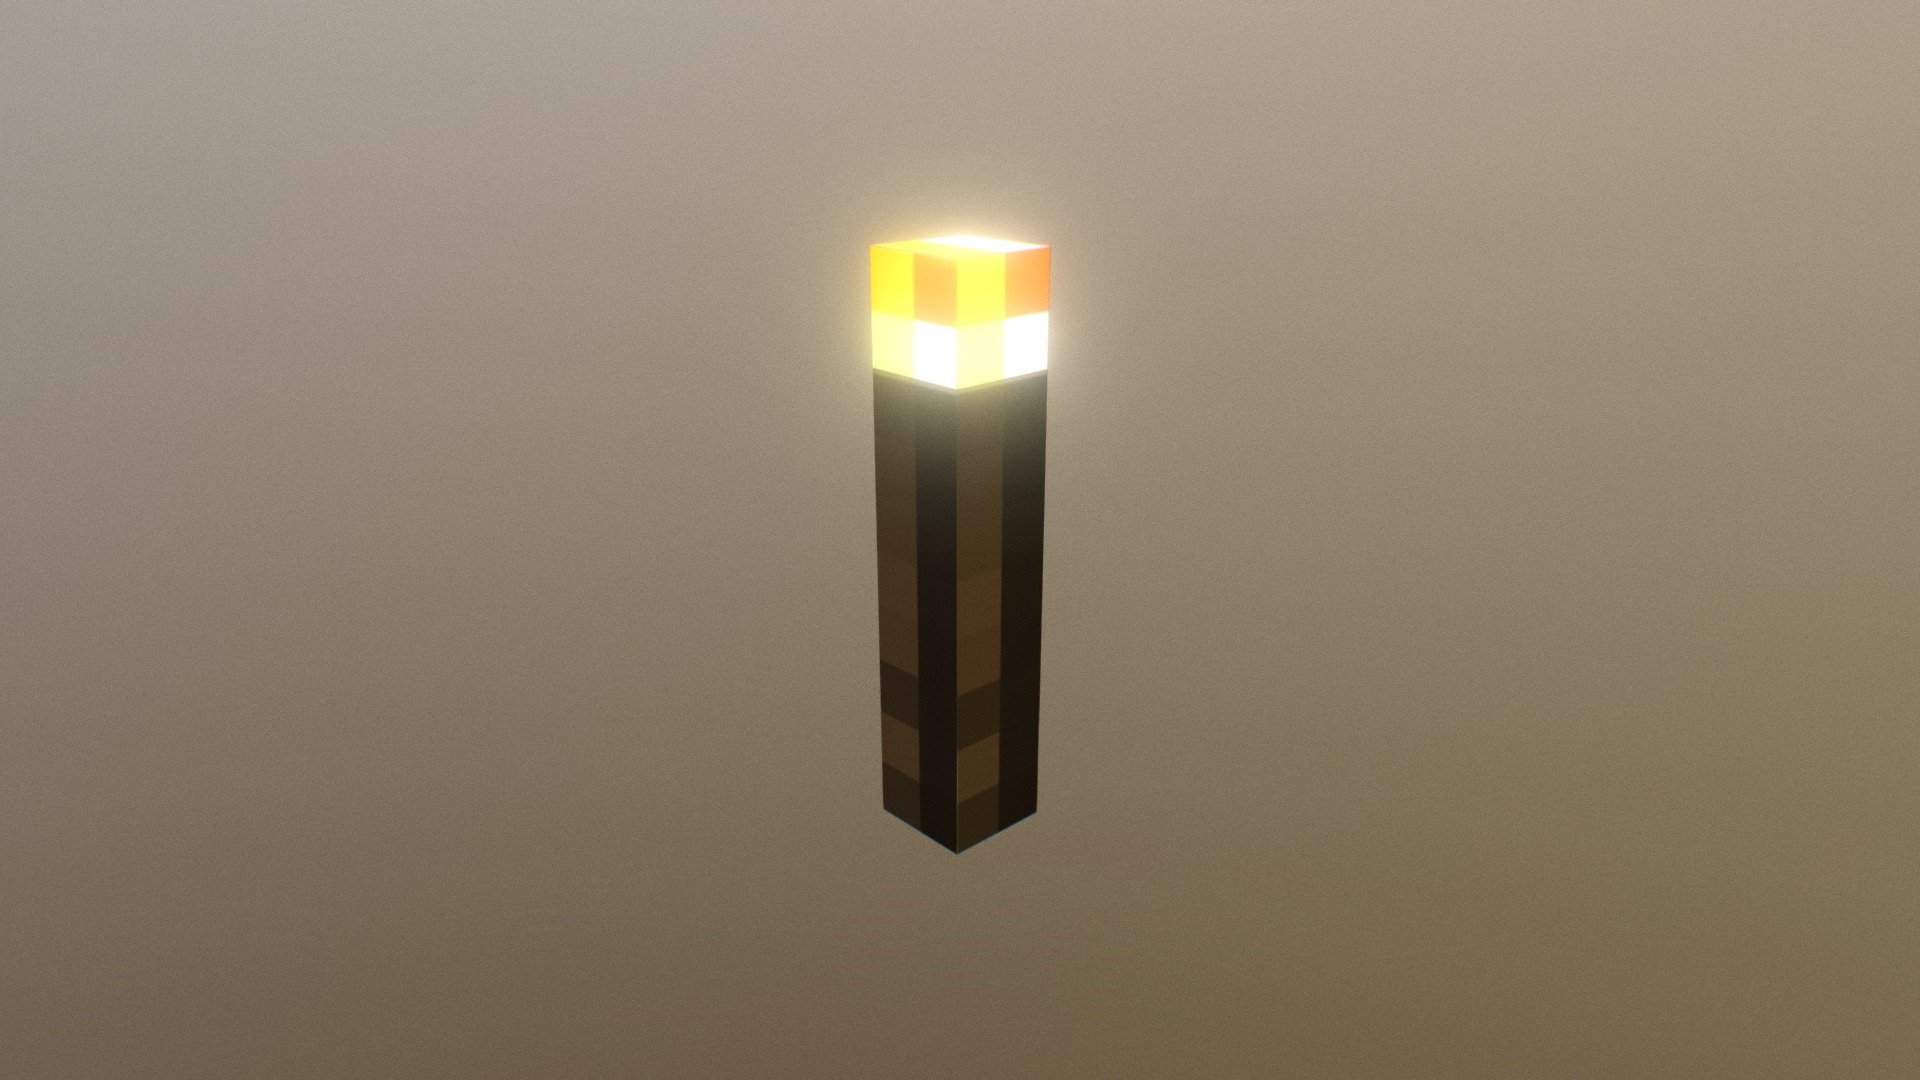 Here is a minecraft torch i created, hope you like it :P 3d model